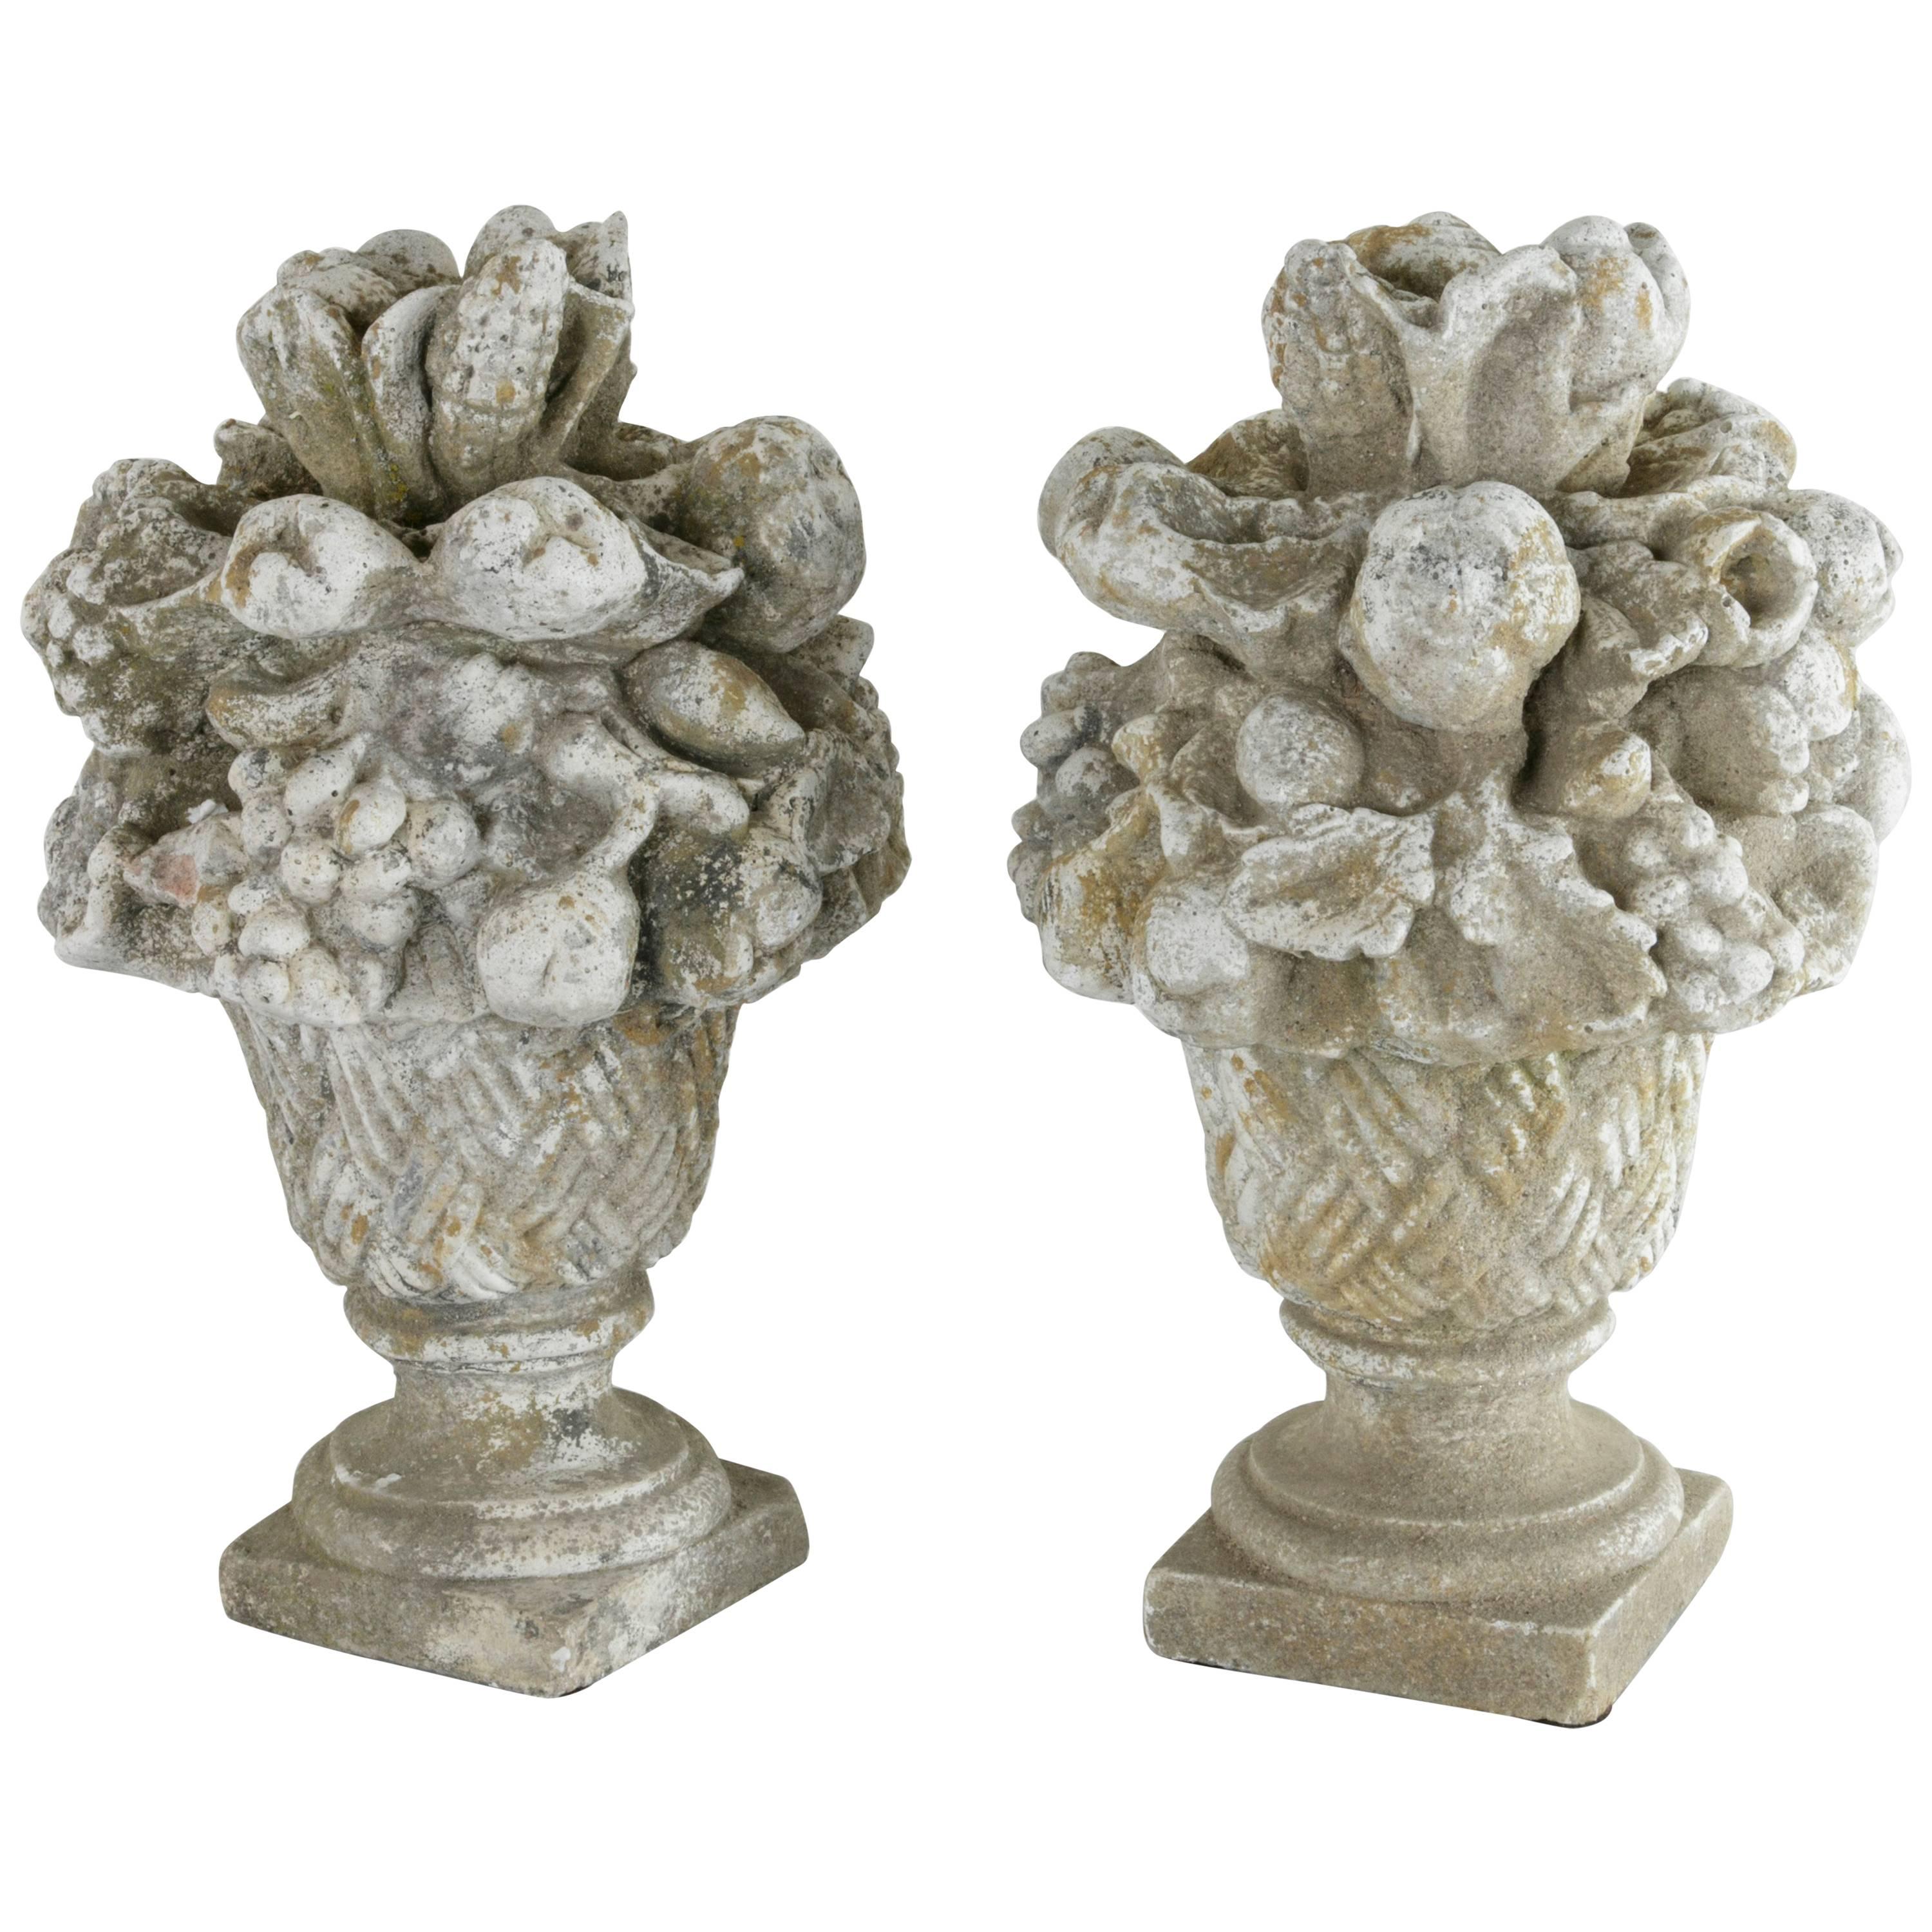 Pair of French Stone Sculptures with Bouquets of Fruit, circa 1900